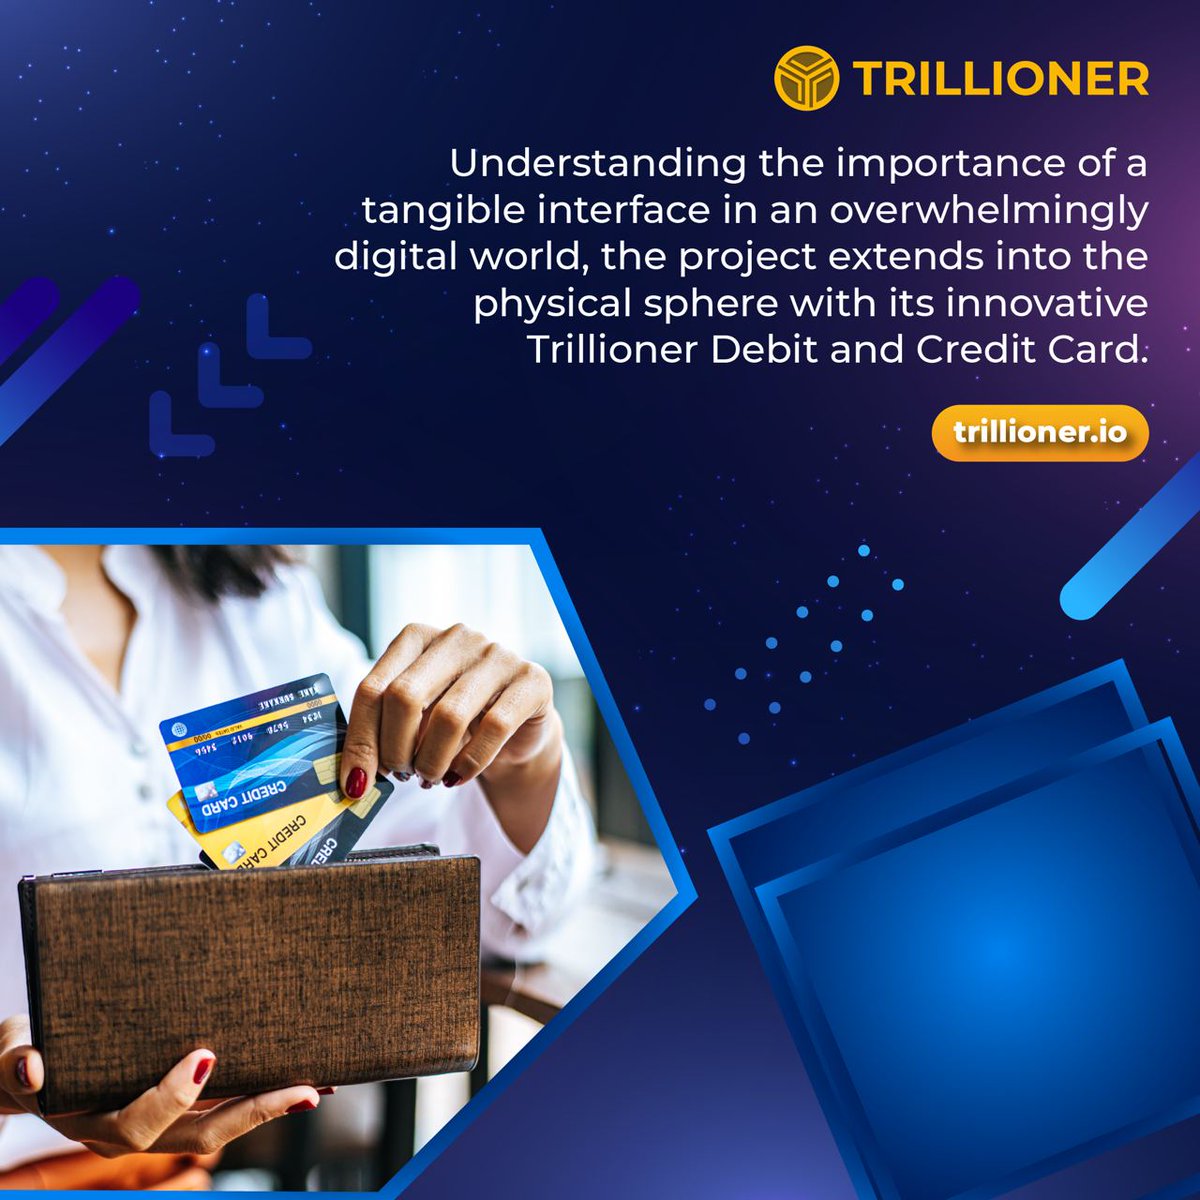 Understanding the importance of a tangible interface in an overwhelmingly digital world, the project extends into the physical sphere with its innovative Trillioner Debit and Credit Card. 

#TLC #Trillioner #TLC #cryptocurrency #cryptonews #cryptotrading #Blockchain